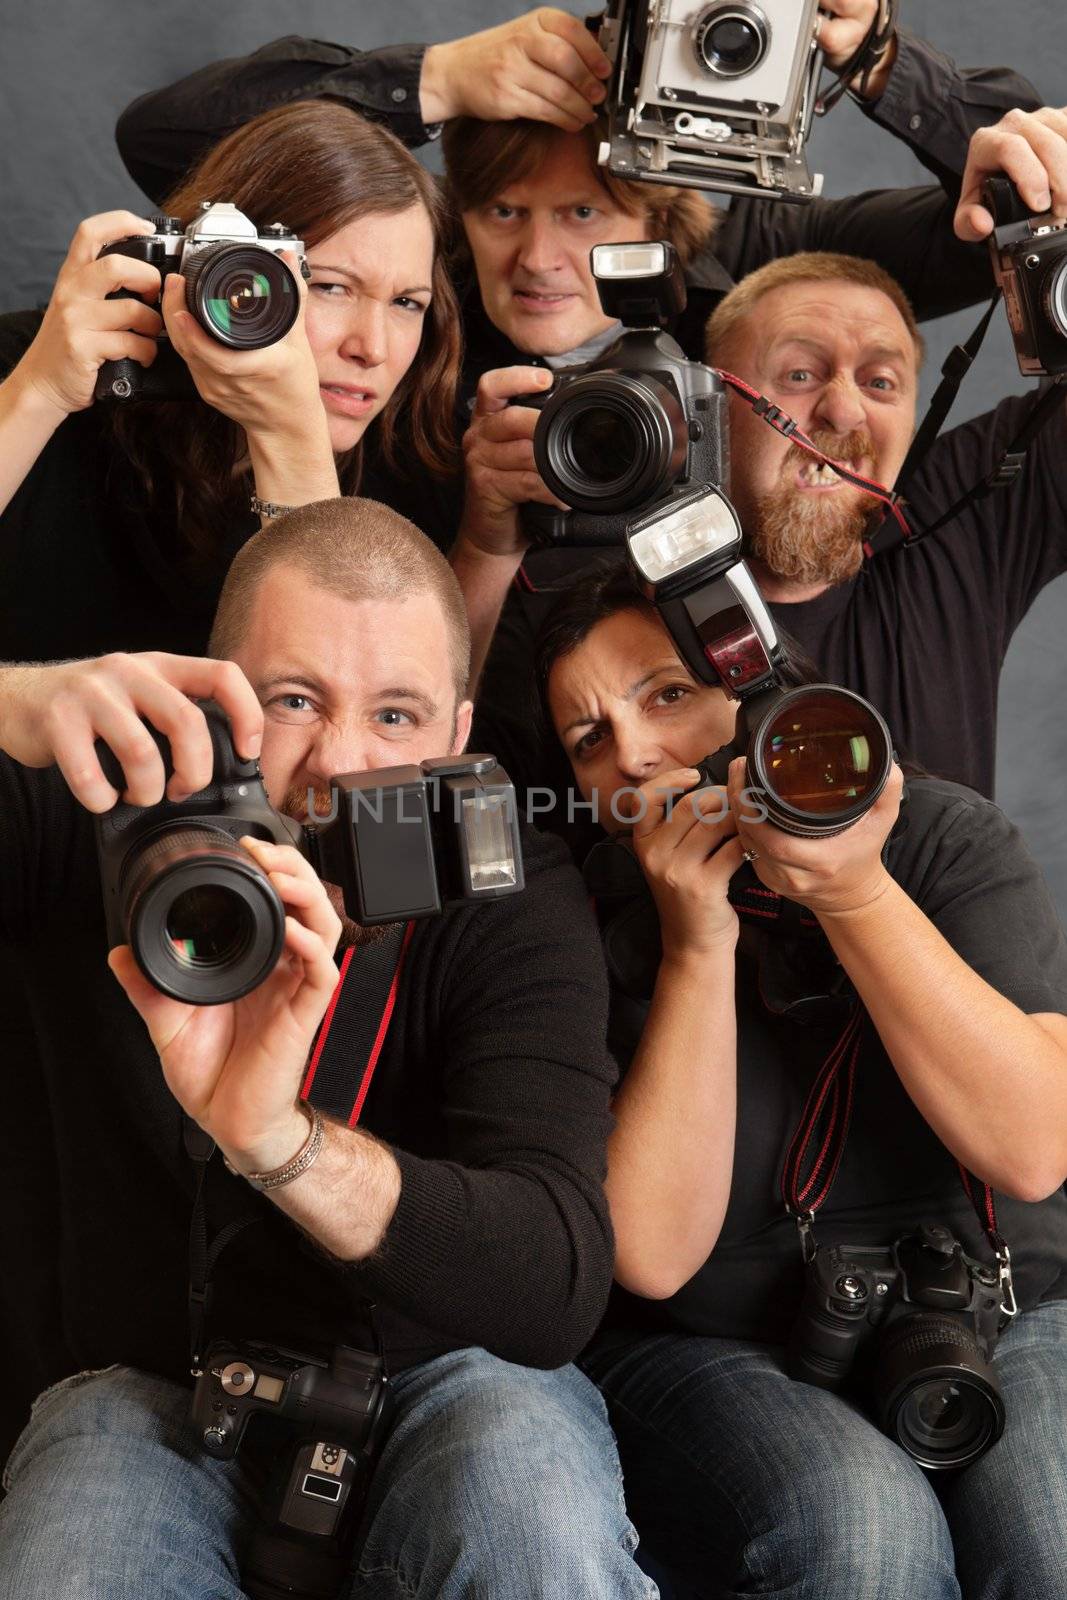 Crazy photographers by sumners